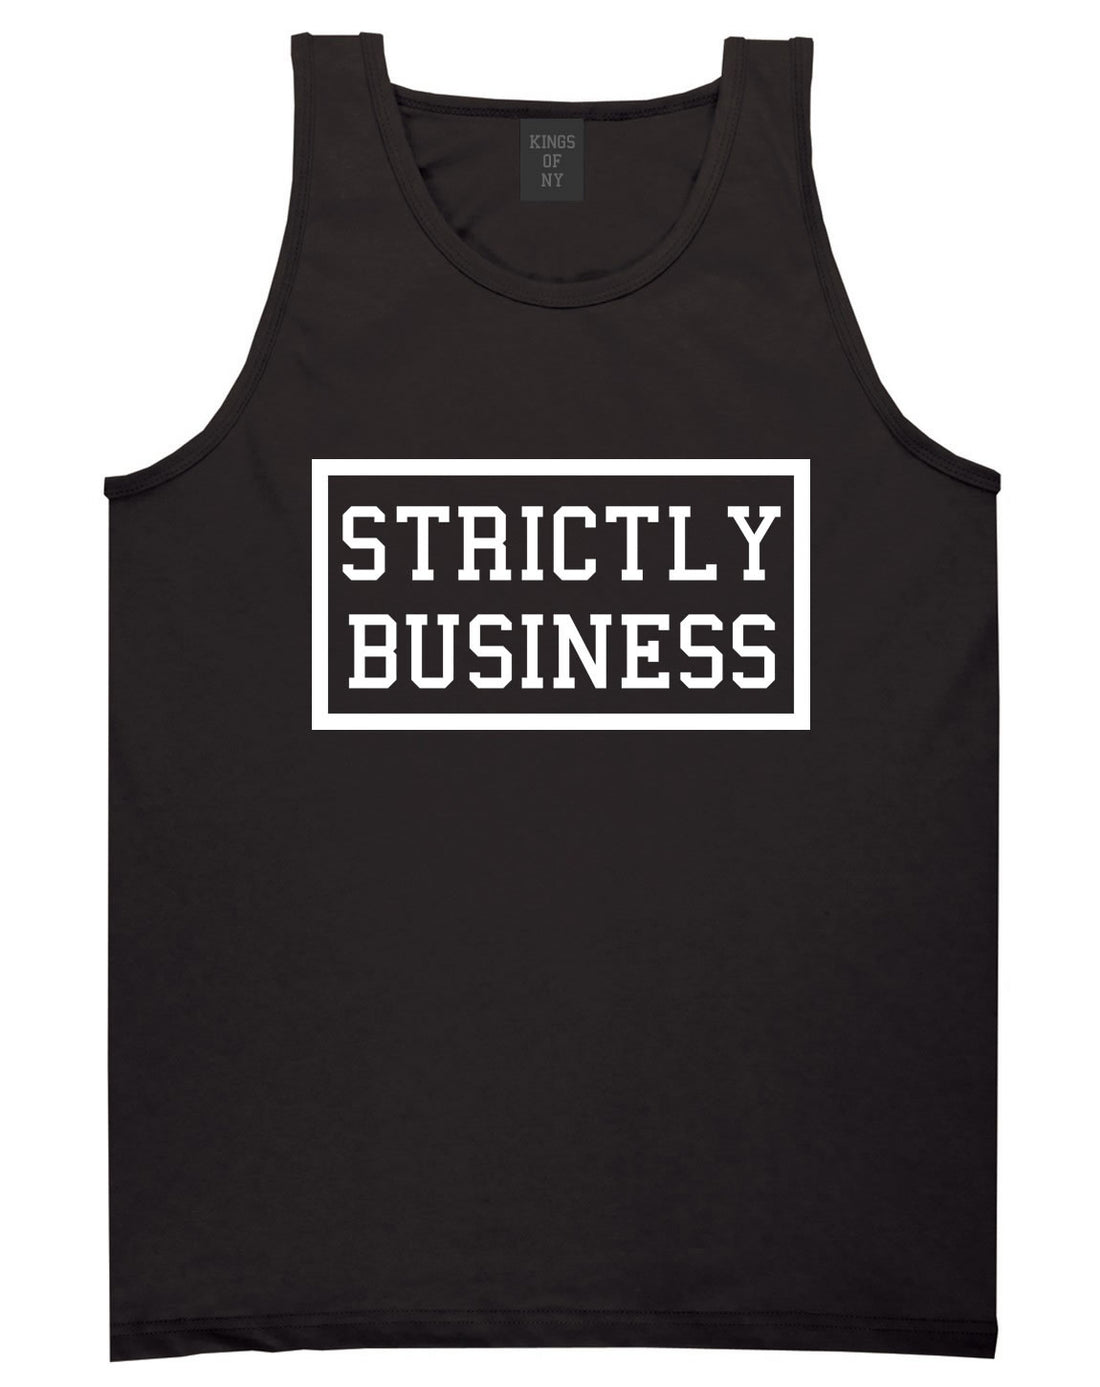 Strictly Business Tank Top in Black by Kings Of NY